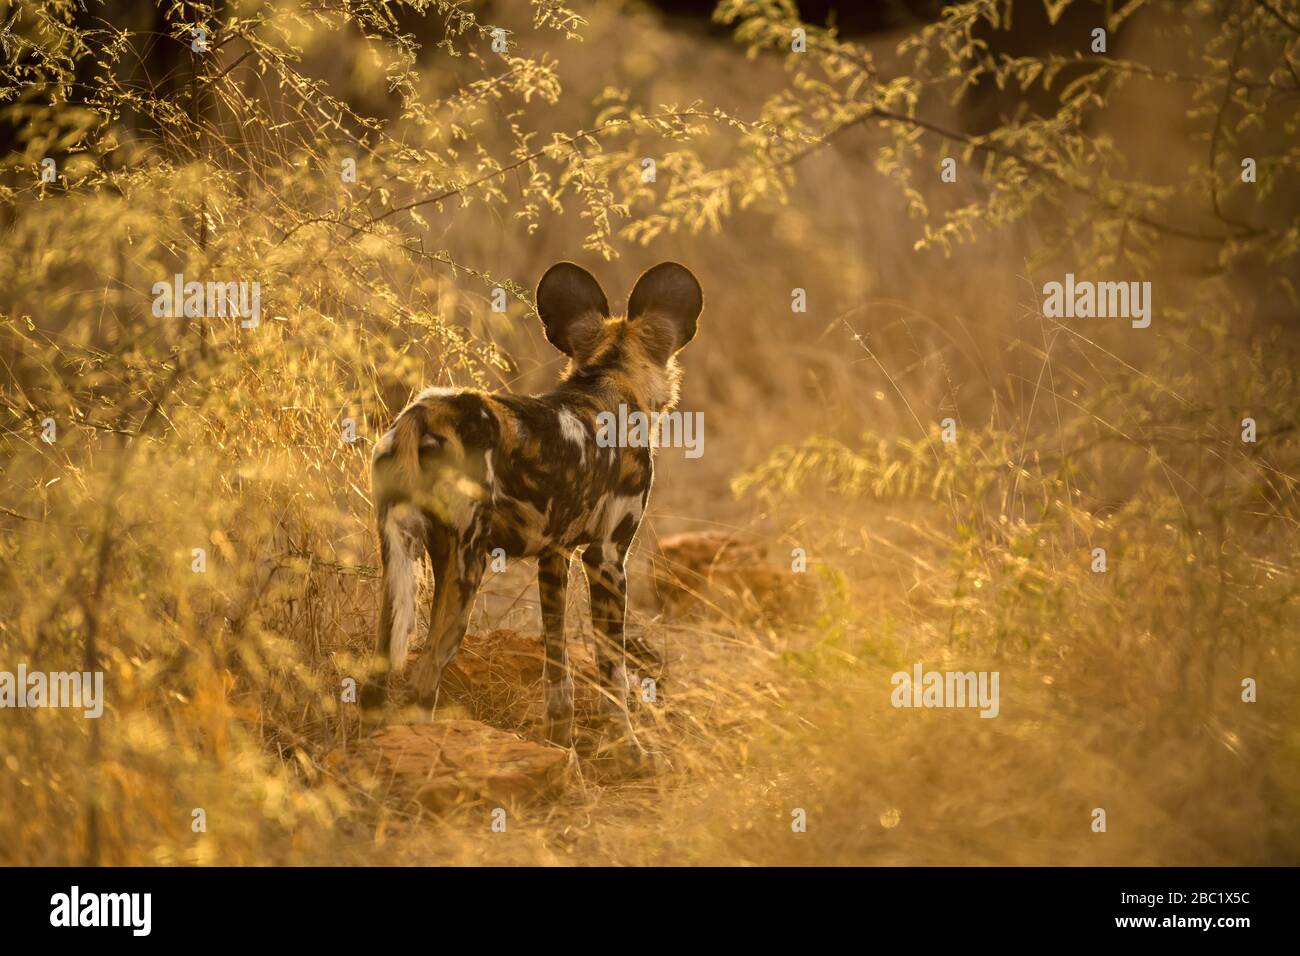 A beautiful sunset photograph of a wild dog intently staring into the bush, framed by golden leaves, taken at the Madikwe Game Reserve, South Africa. Stock Photo